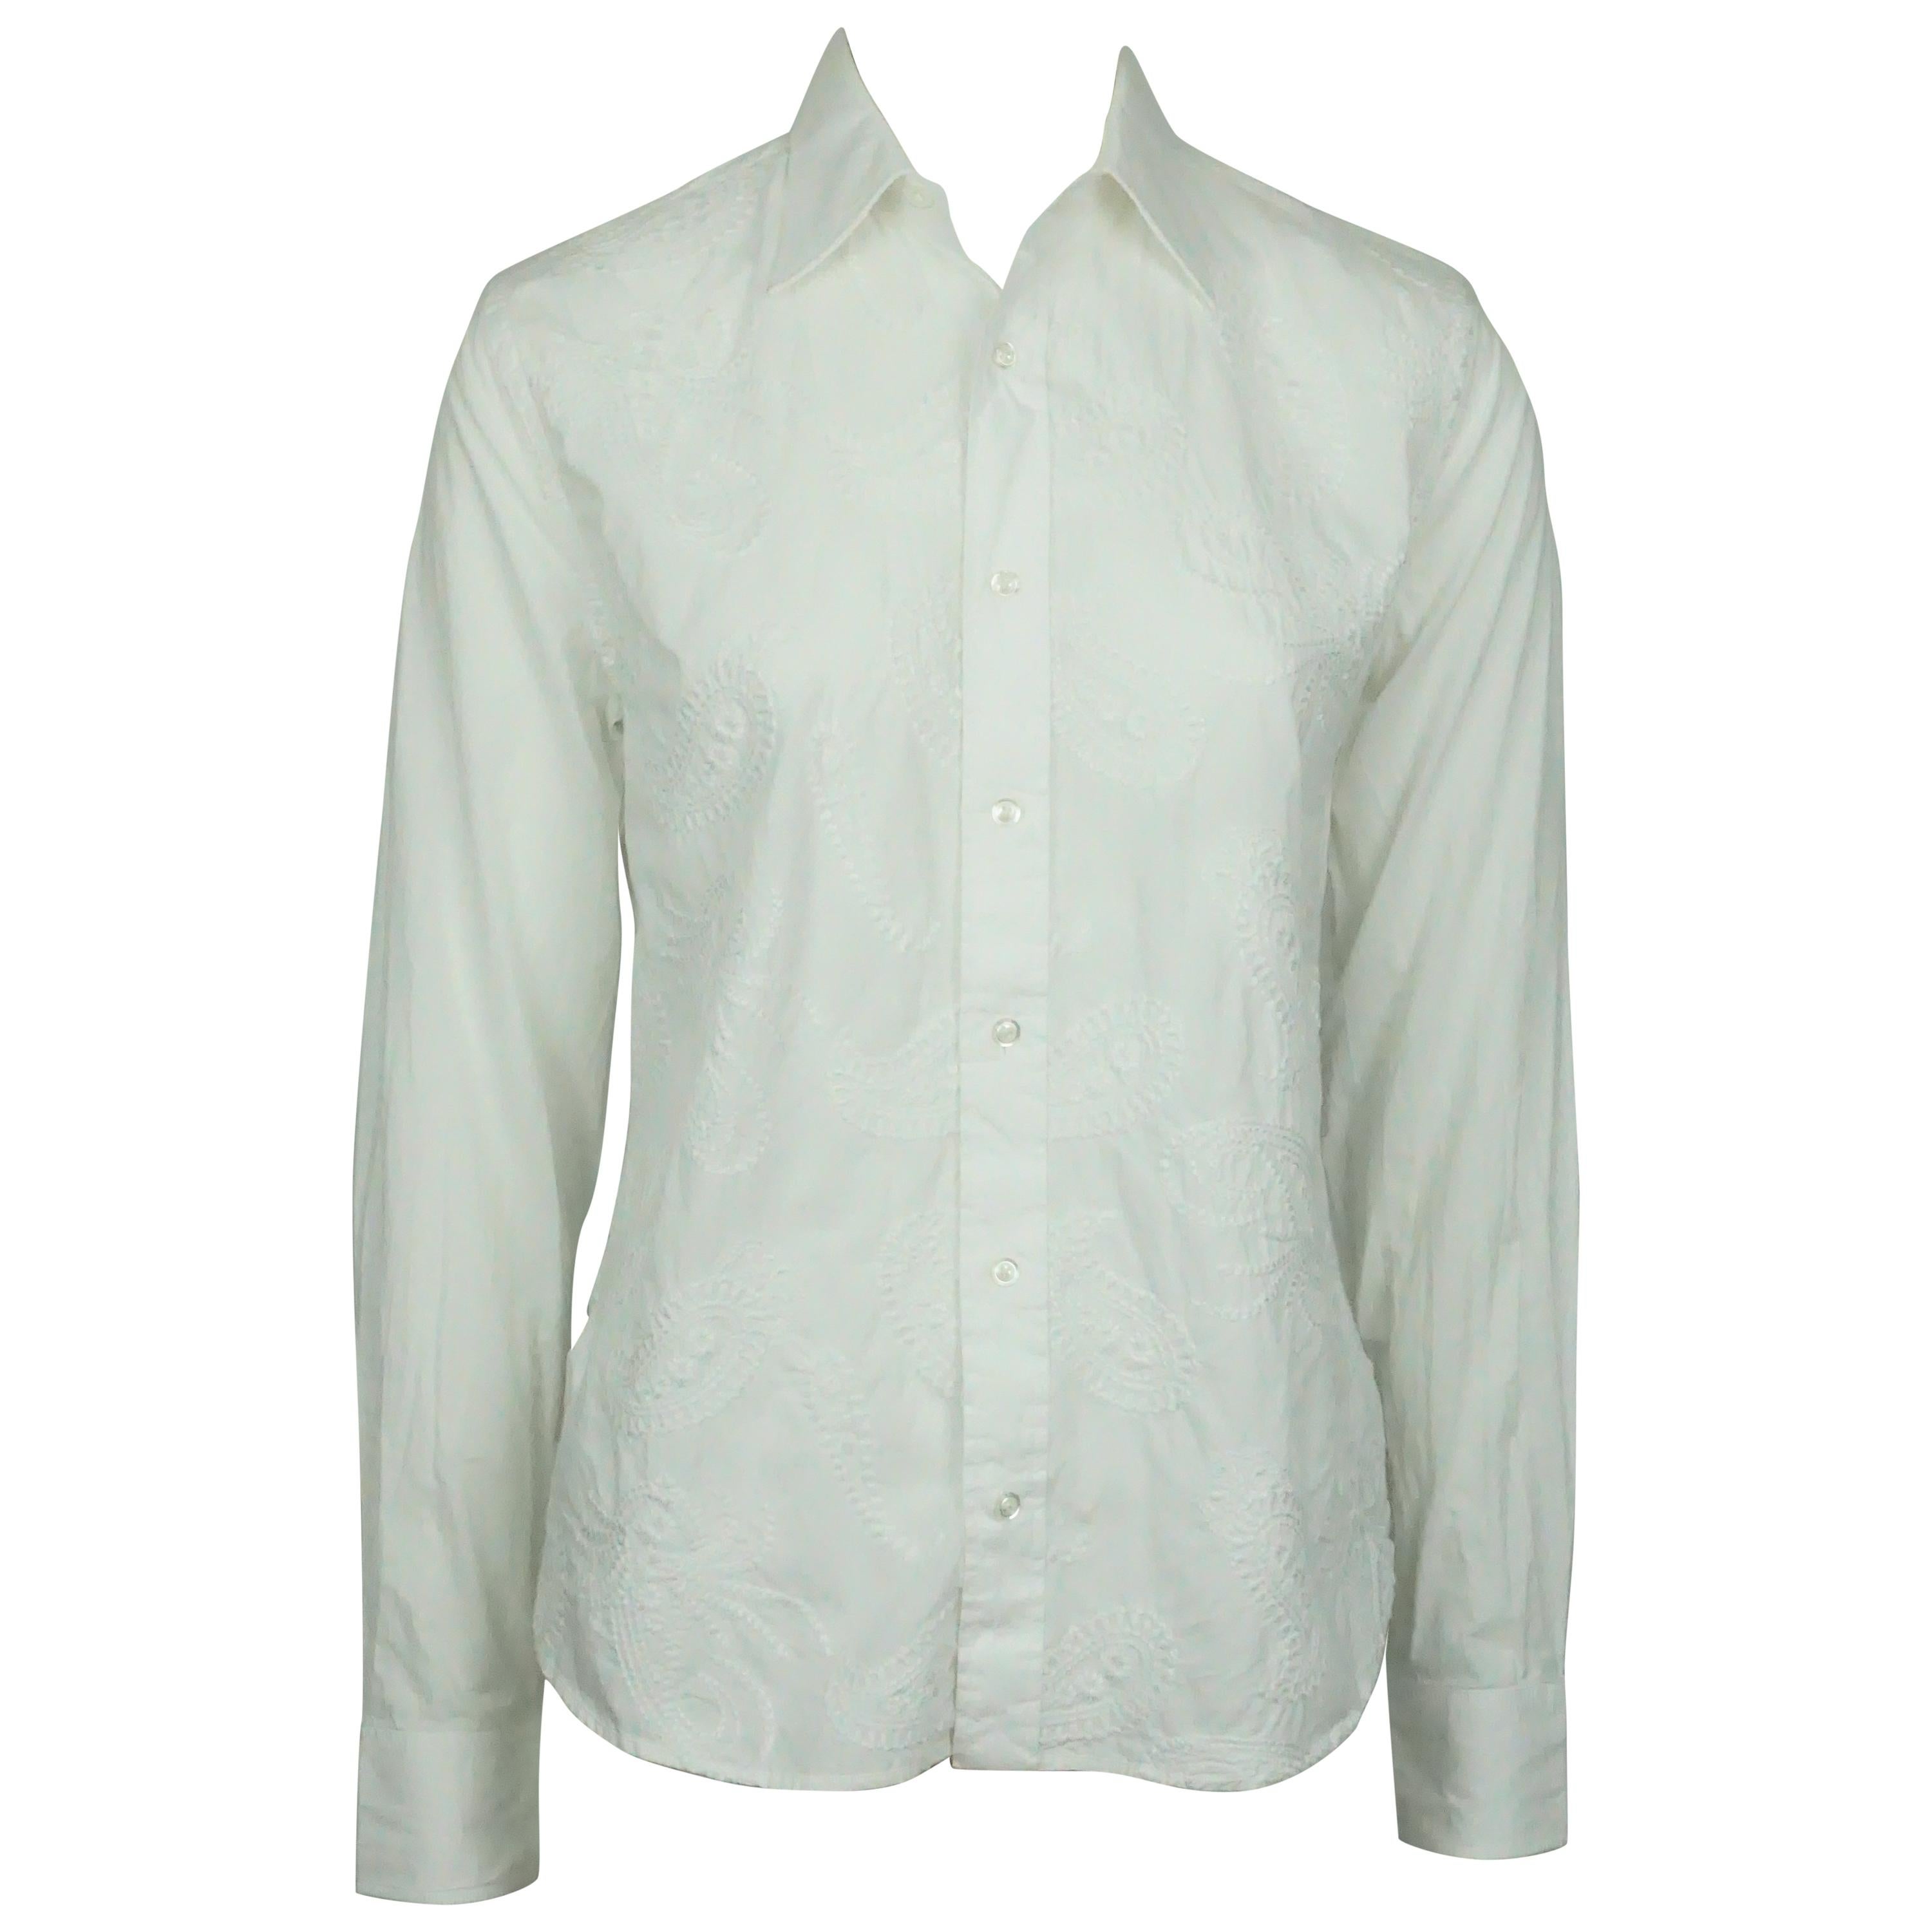 Ralph Lauren BL White Collared Shirt w/ Paisley Embroidery - 4  For Sale